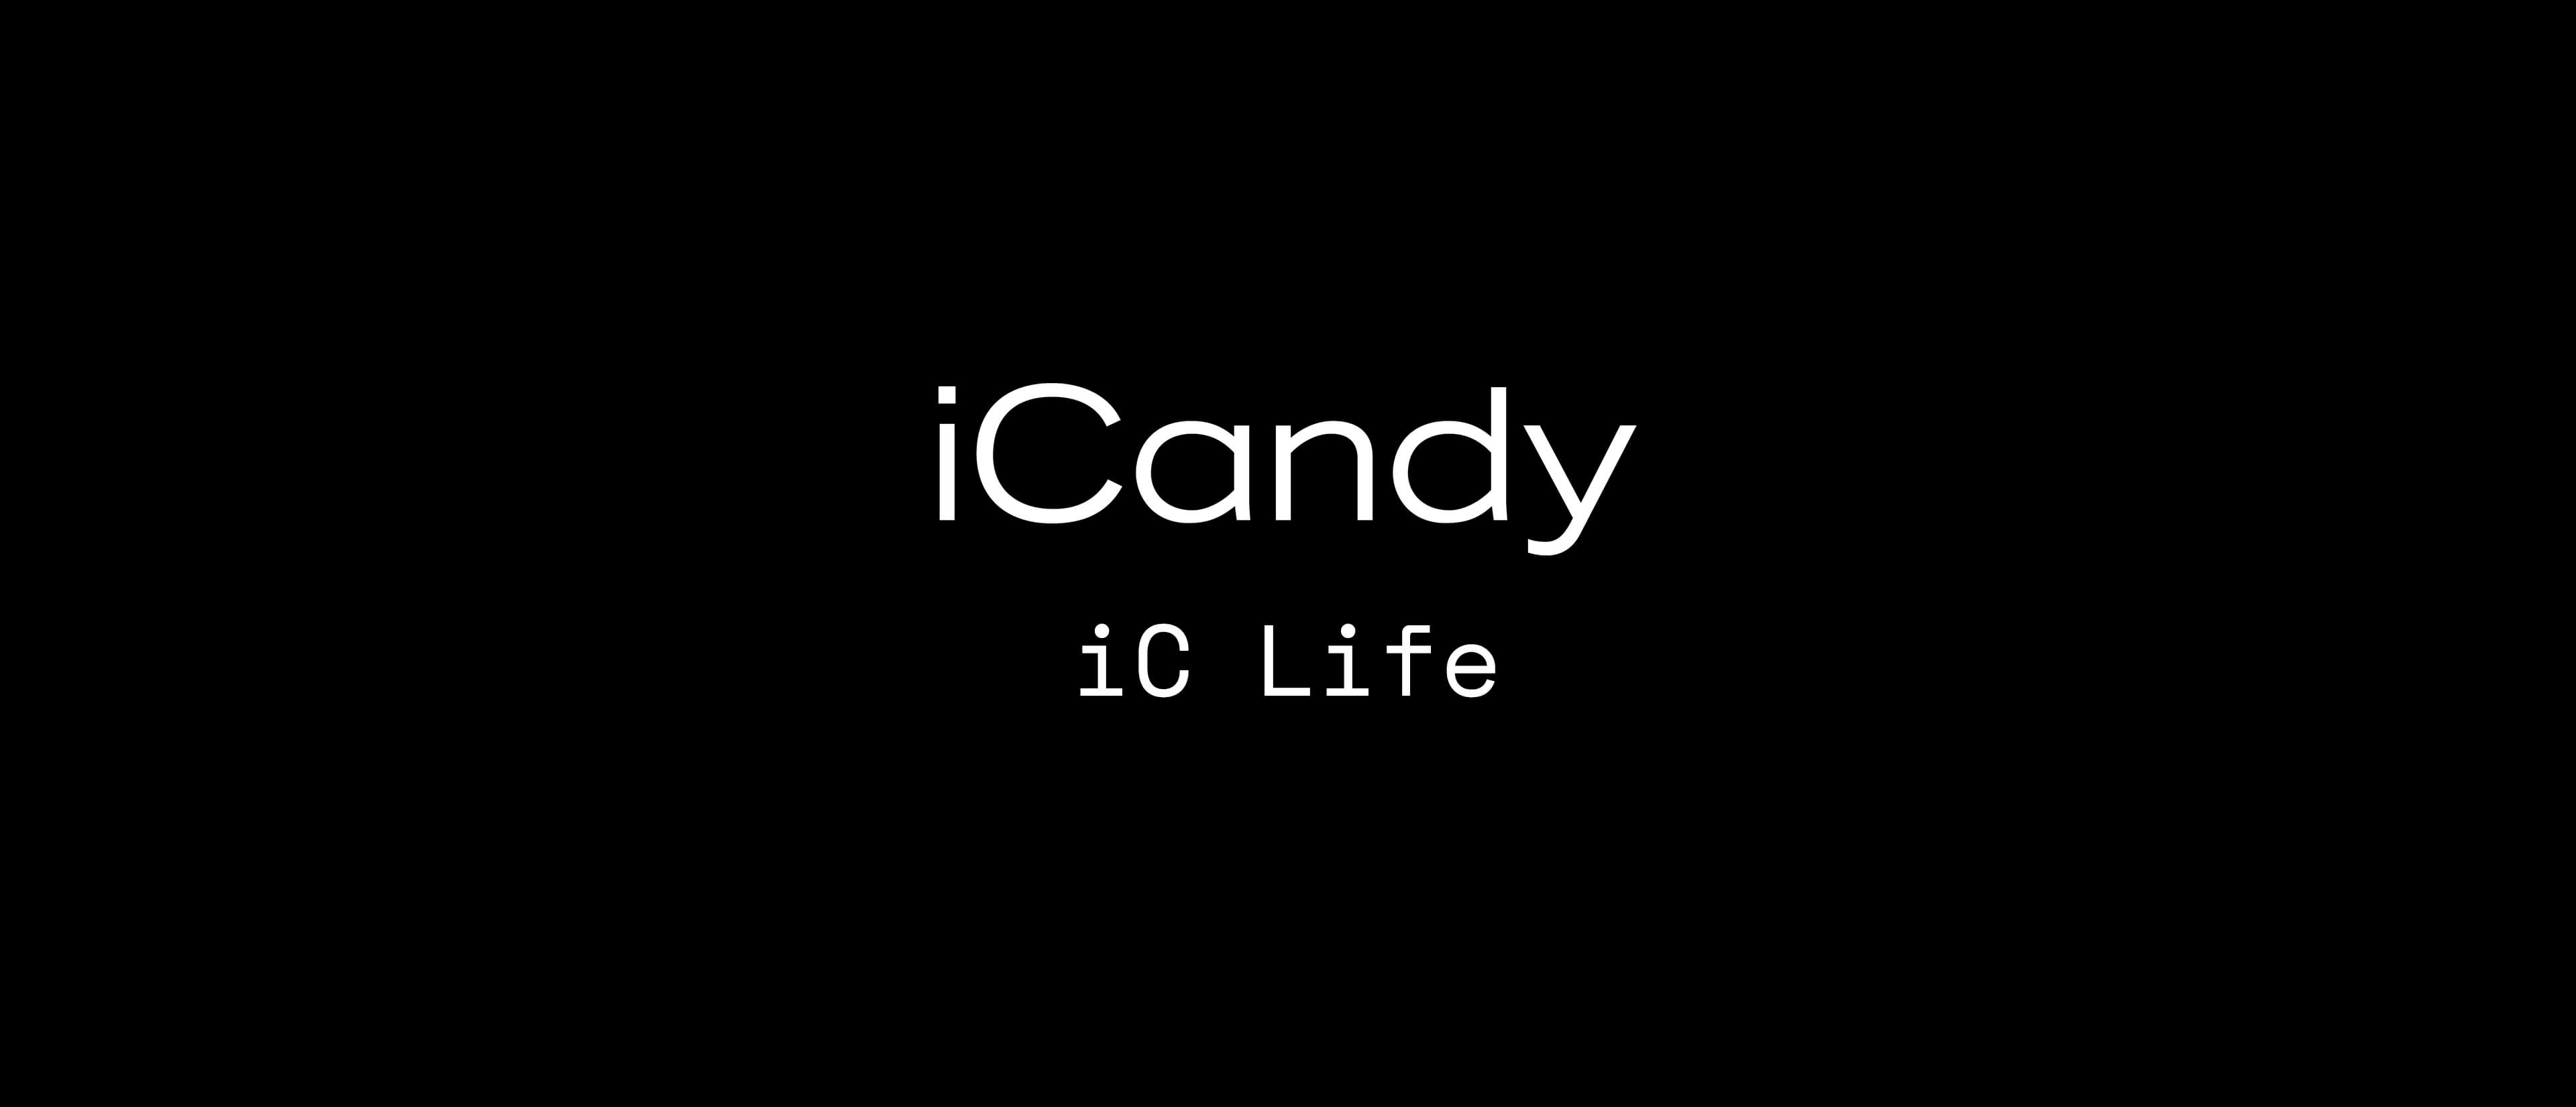 Sammi Jefcoate and the iCandy Peach #MyiCandyStyle